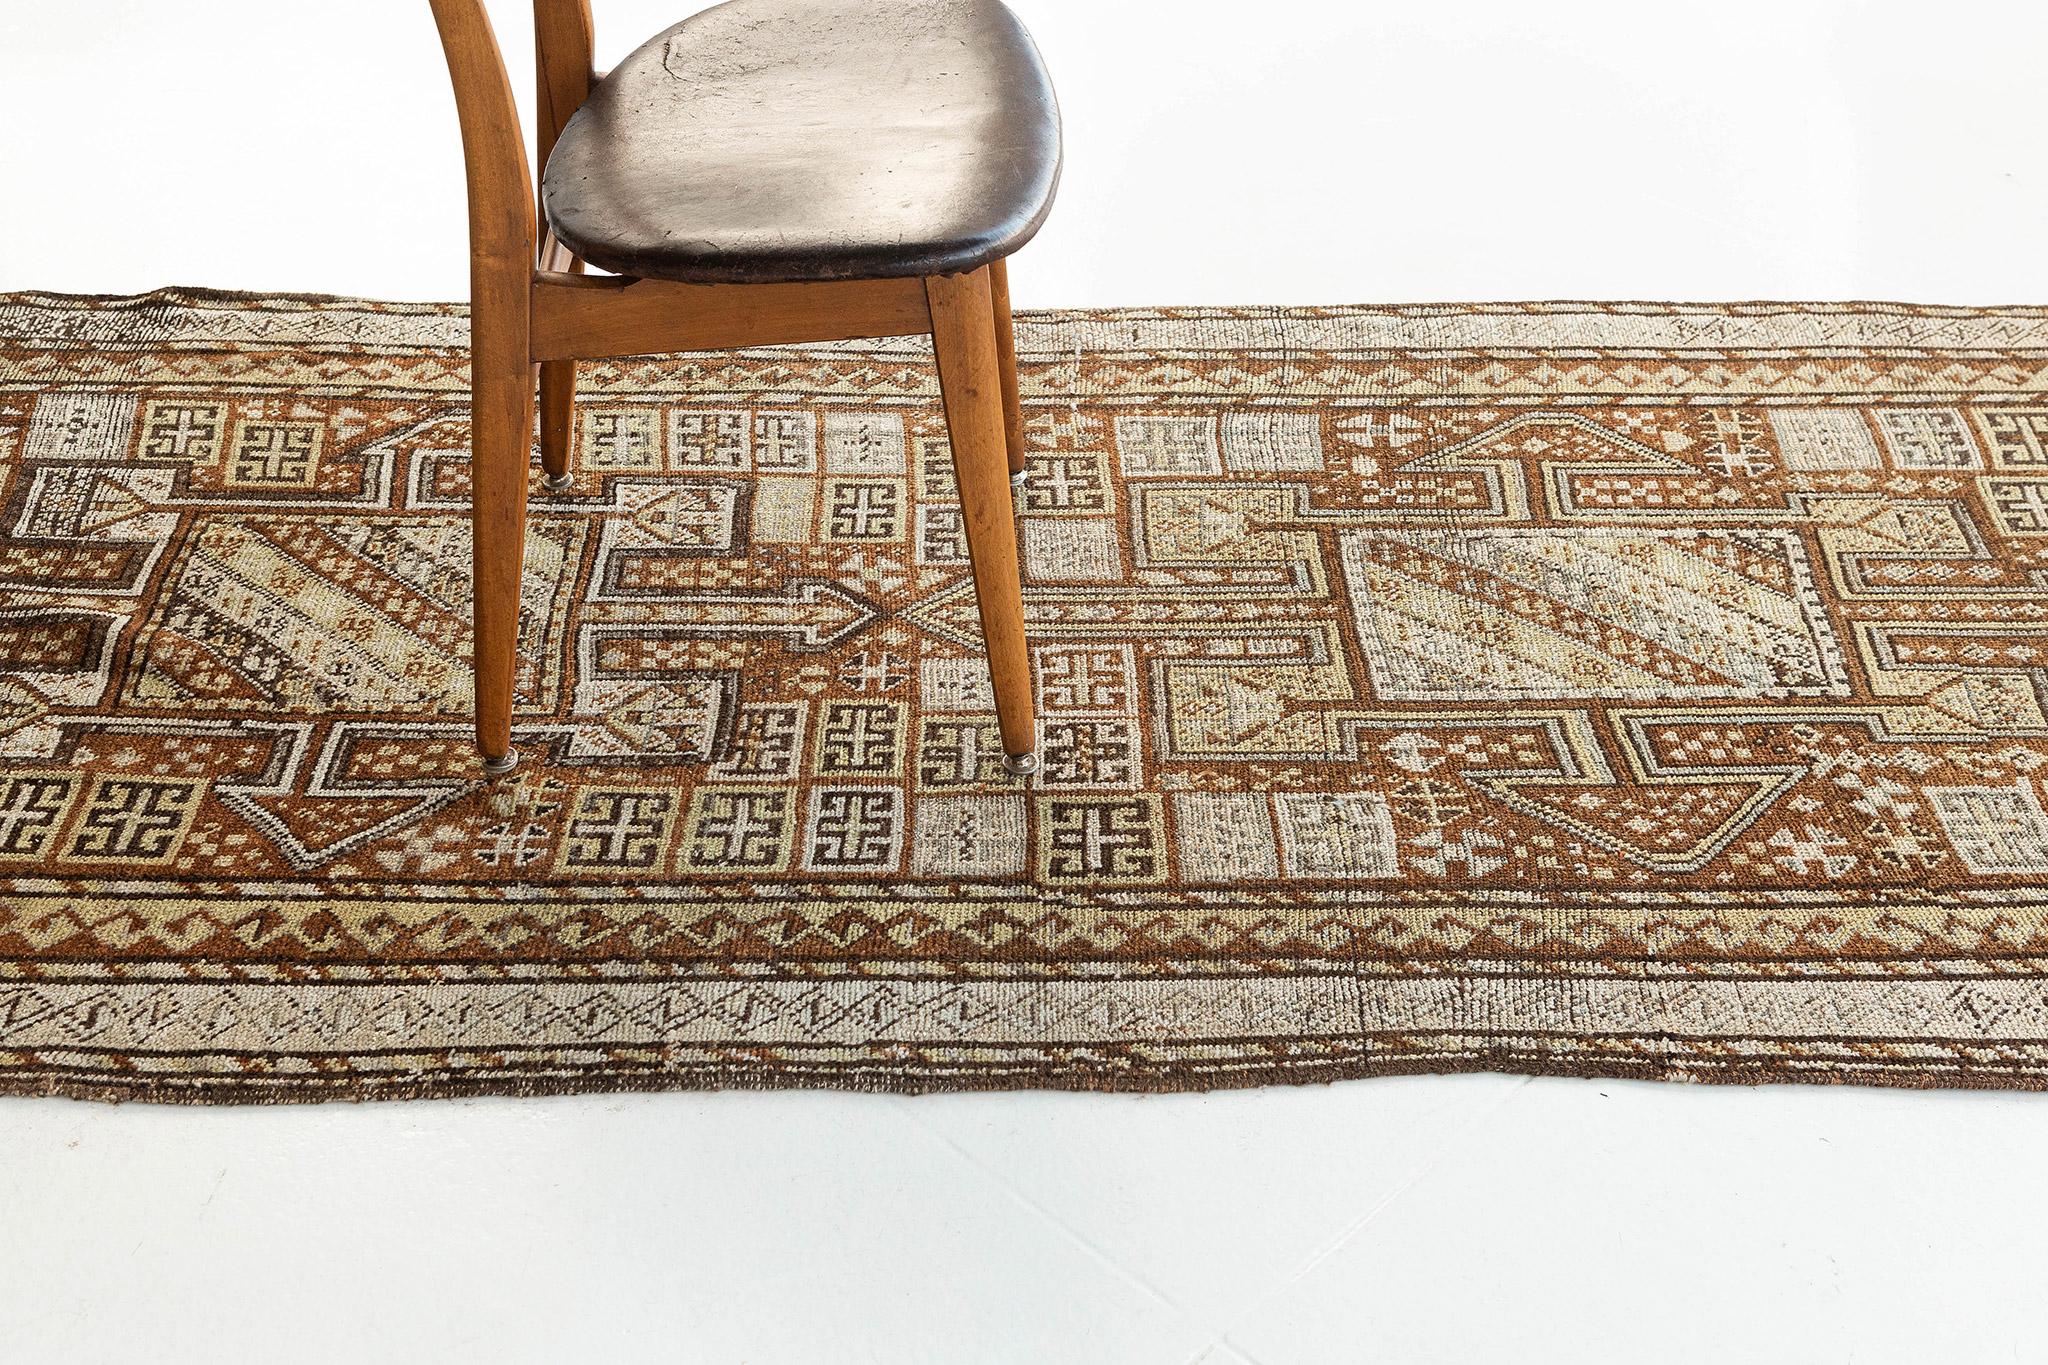 An antique Caucasian Kazak runner with brown and gold colors with a mesmerizing beautiful finish. This rug is distinctly tribal and geometric and yet the color way creates an overall effect that is soft and subdued. With is lavish, brilliant color